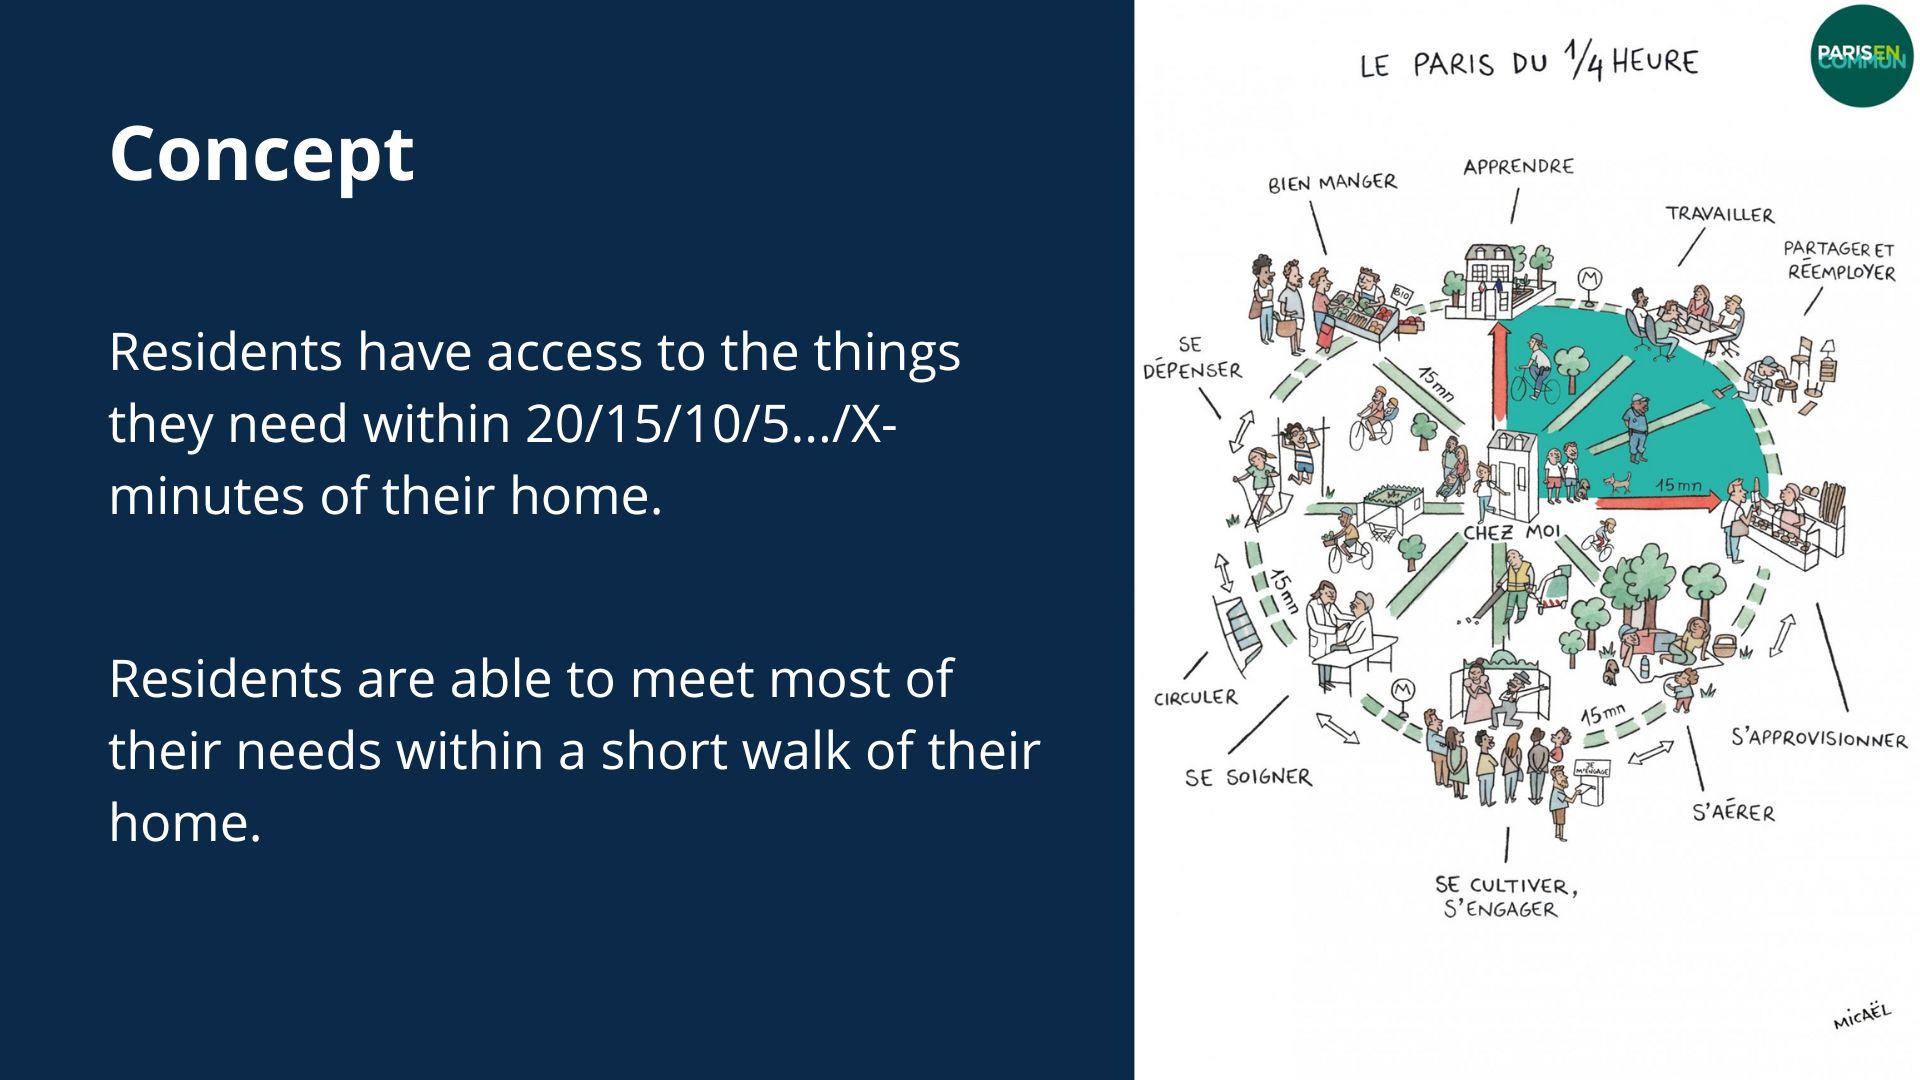 Slide using an infographic to illustrate the concept that resdients are able to meet most of their needs within a short walk of their home.